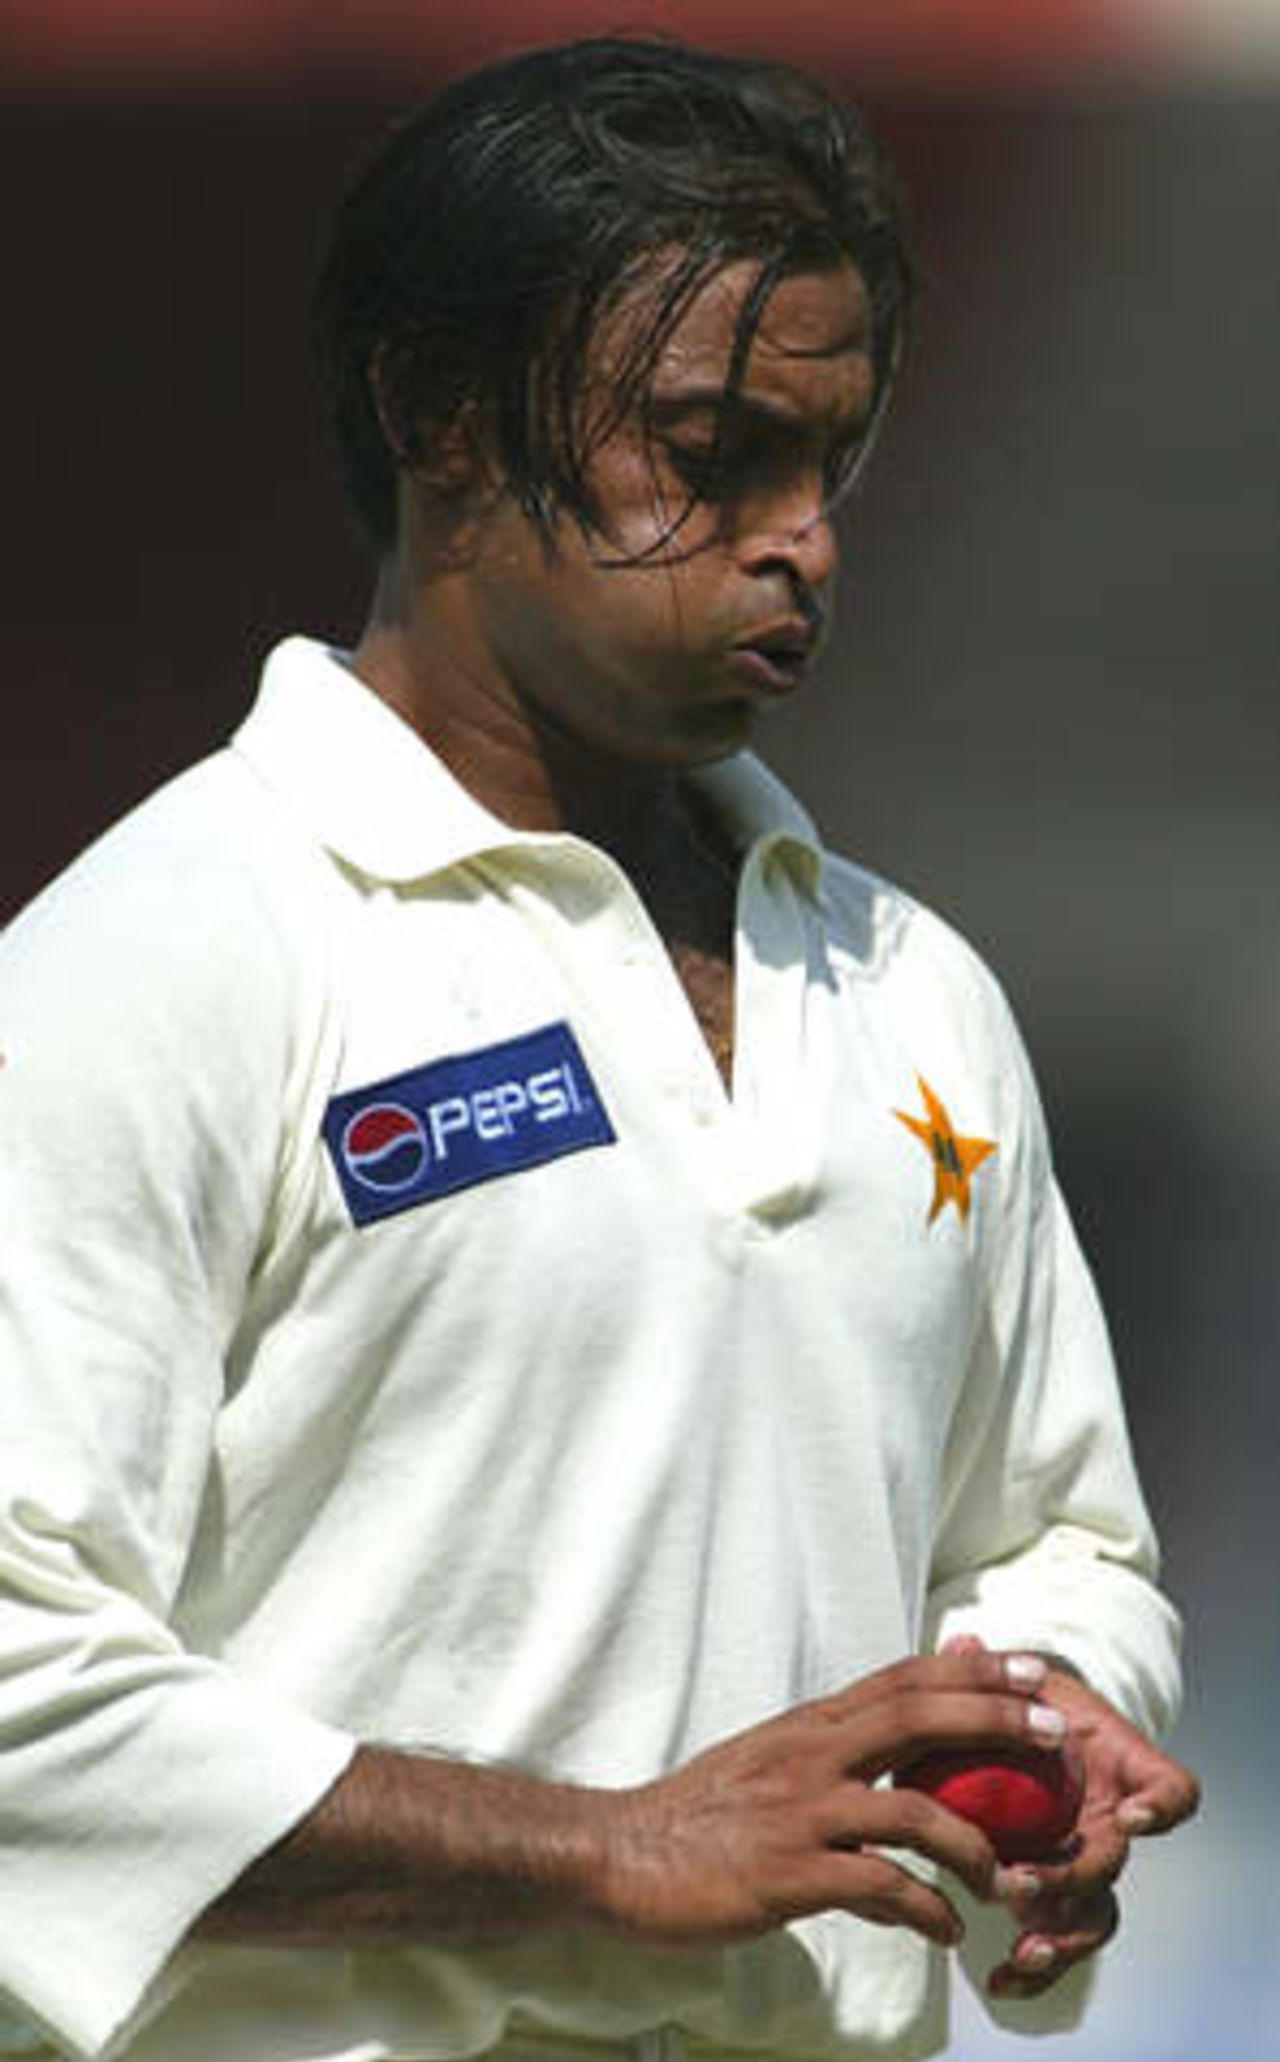 Pakistan fast bowler Shoaib Akhtar prepares to bowl against Australia's Matthew Hayden at Sharjah's stadium October 12, 2002 on the second day of their second cricket test match. The second and third tests are being held in the neutral venue of Sharjah after Australia balked at playing in Pakistan due to security concerns.